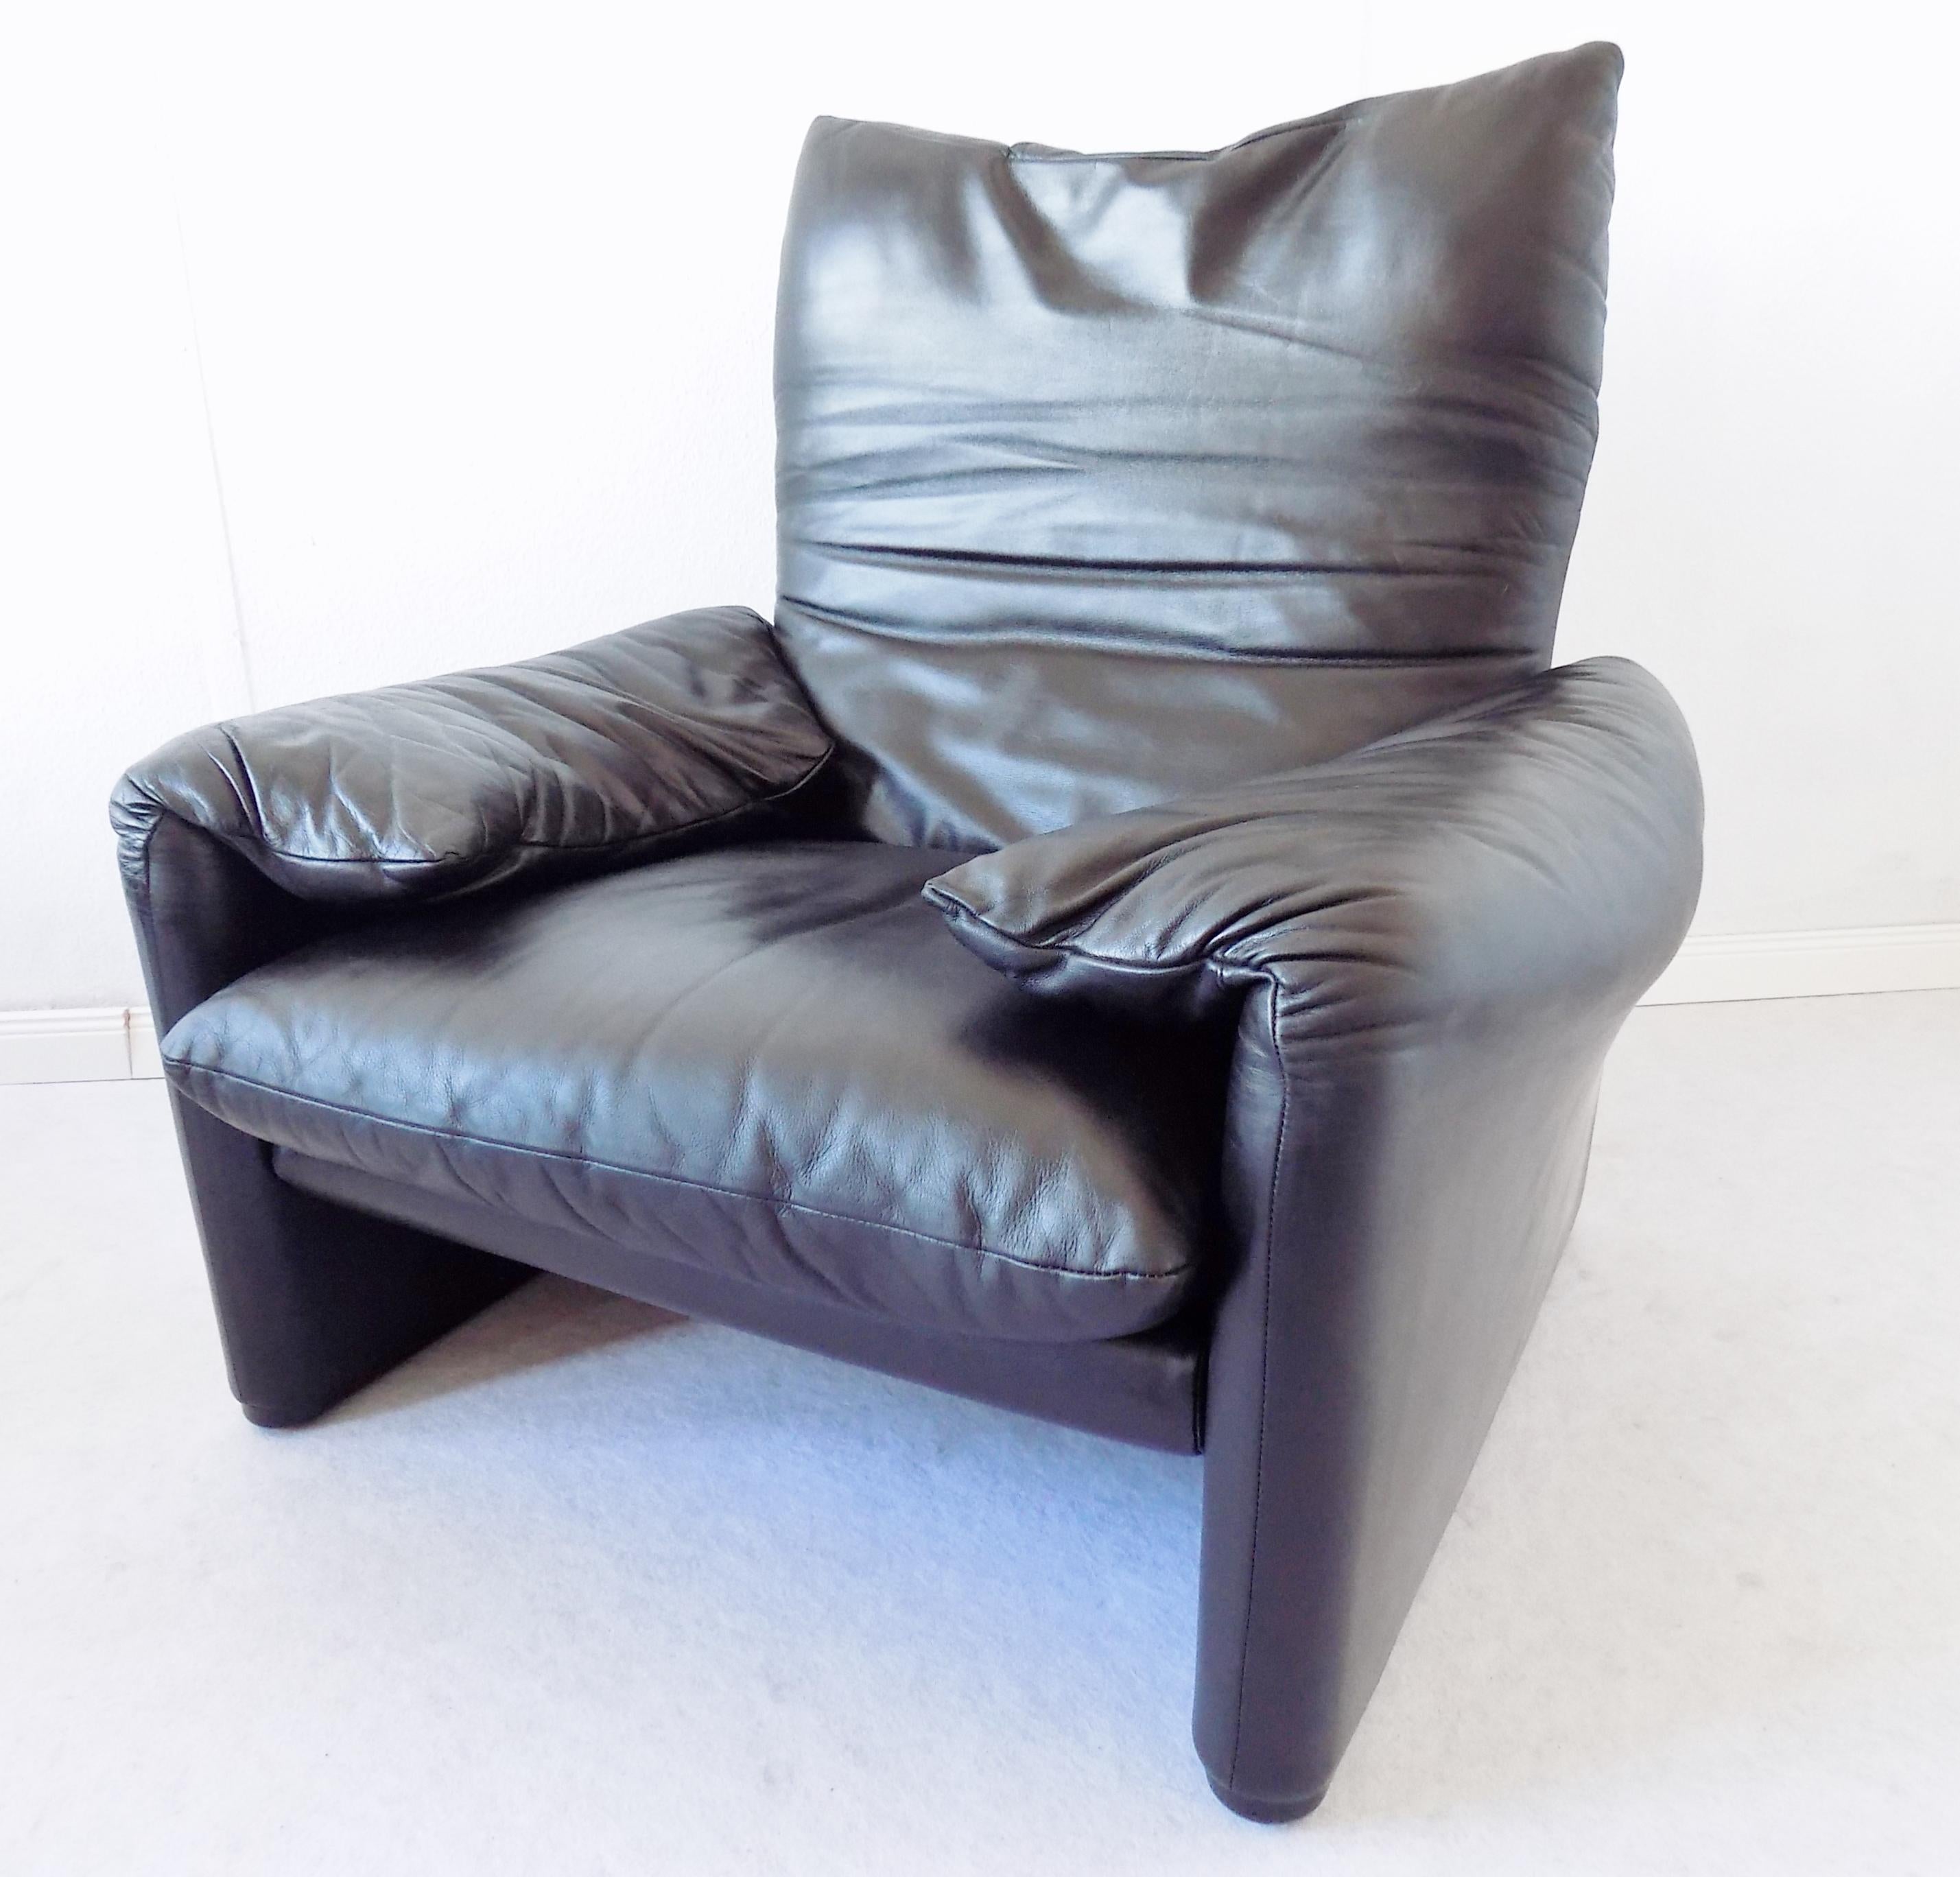 Cassina Maralunga Black Leather Lounge chair, by Vico Magistretti, Mid-Century 

The maralunga chair was designed in 1973 by Vico Magistretti and stands out of other chairs as it can be converted from a stylish lounge chair to a serious armchair